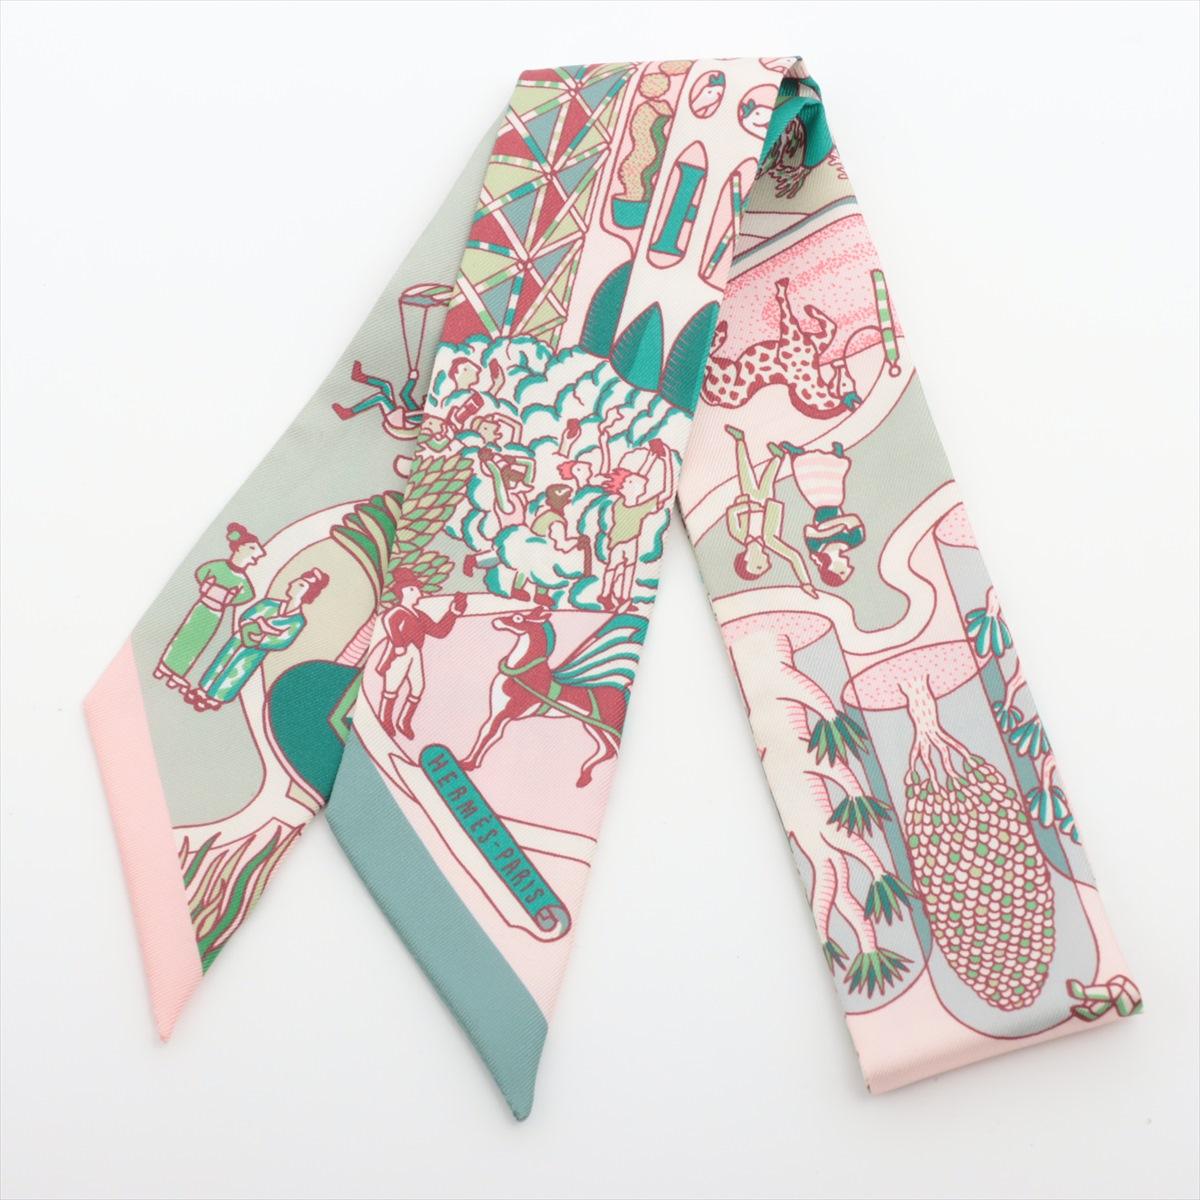 The Hermès Twilly Exposition Universelle World Silk is a luxurious and versatile accessory that embodies the brand's heritage and craftsmanship. Crafted from fine silk twill, the Twilly scarf features a captivating design inspired by the Exposition